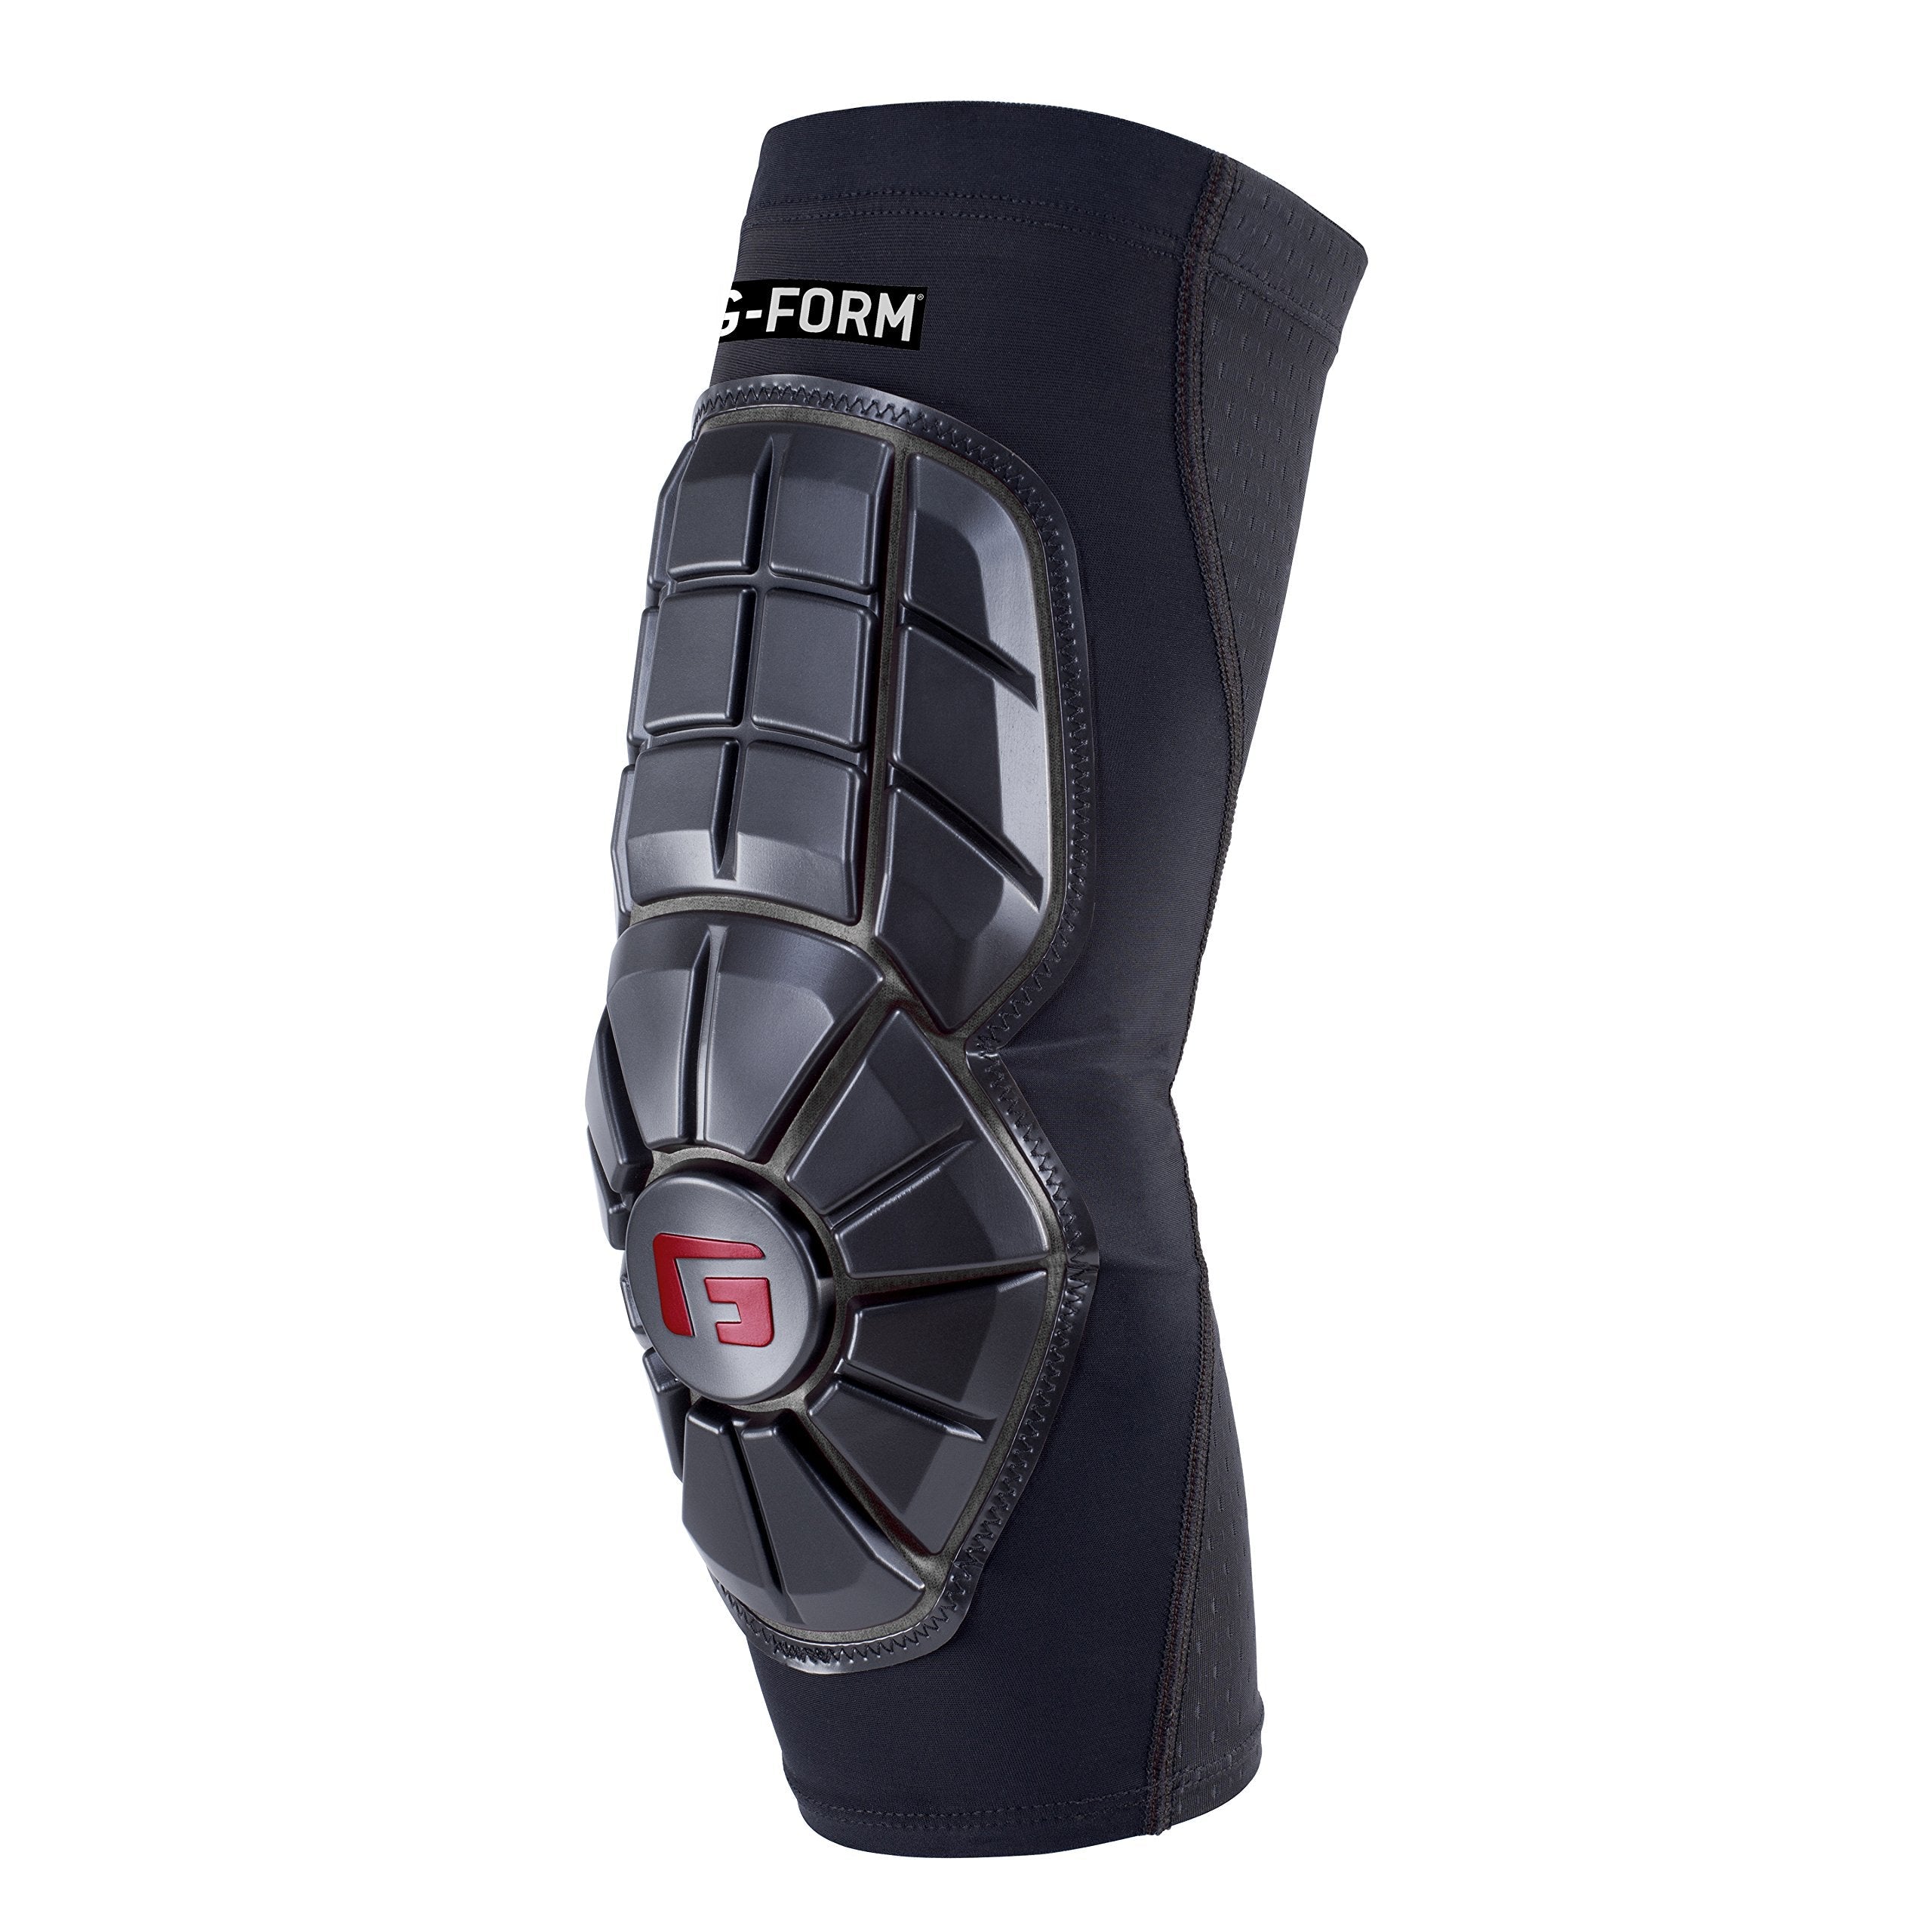 EvoShield Lacrosse Arm Guards: Formed for Fast